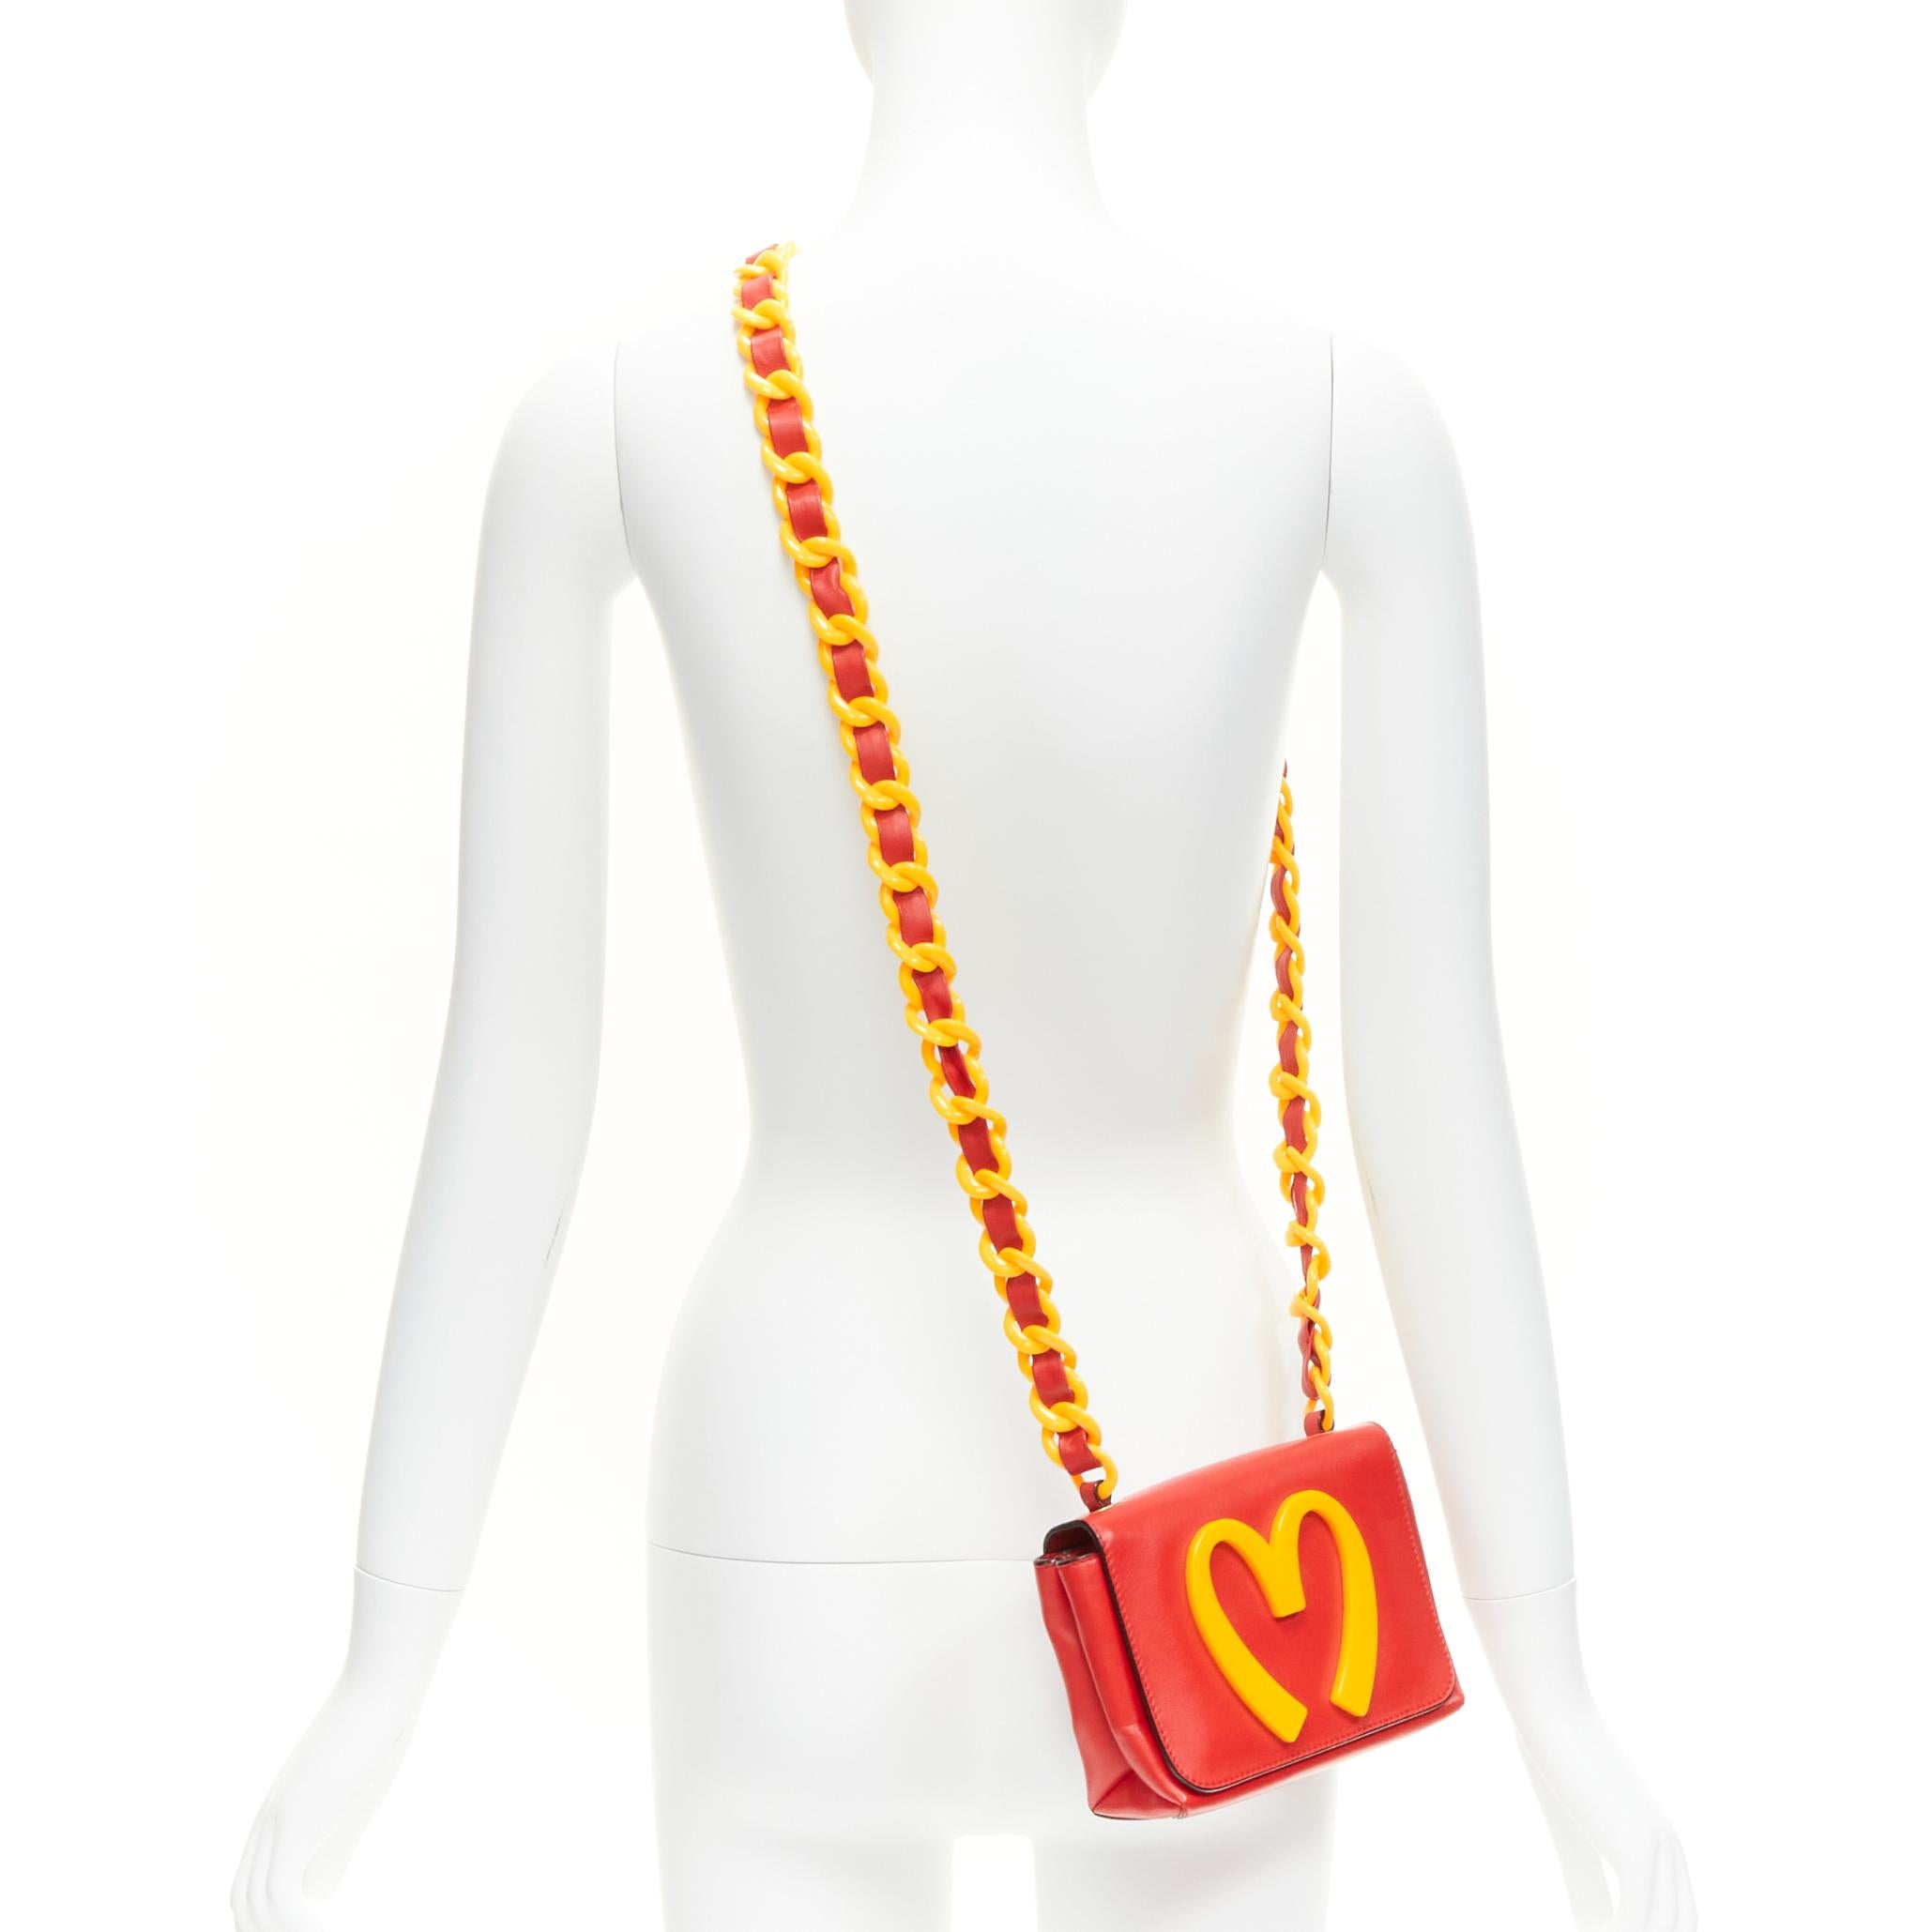 Moschino Red/Yellow Leather French Fry Chain Crossbody Bag Moschino